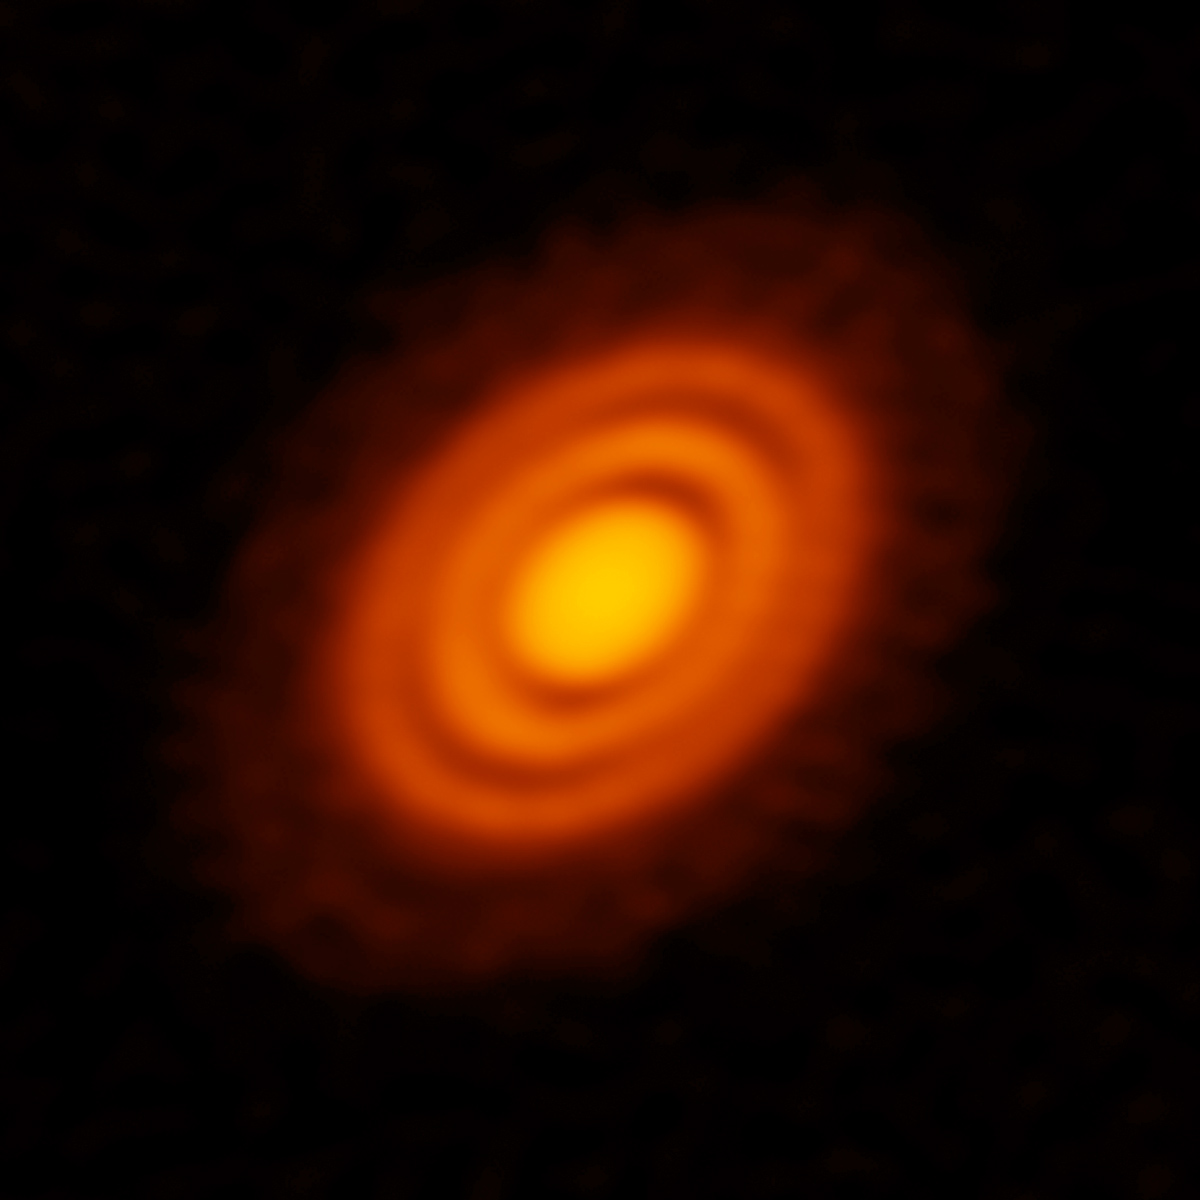 ALMA image of the protoplanetary disk surrounding the young star HD 163296